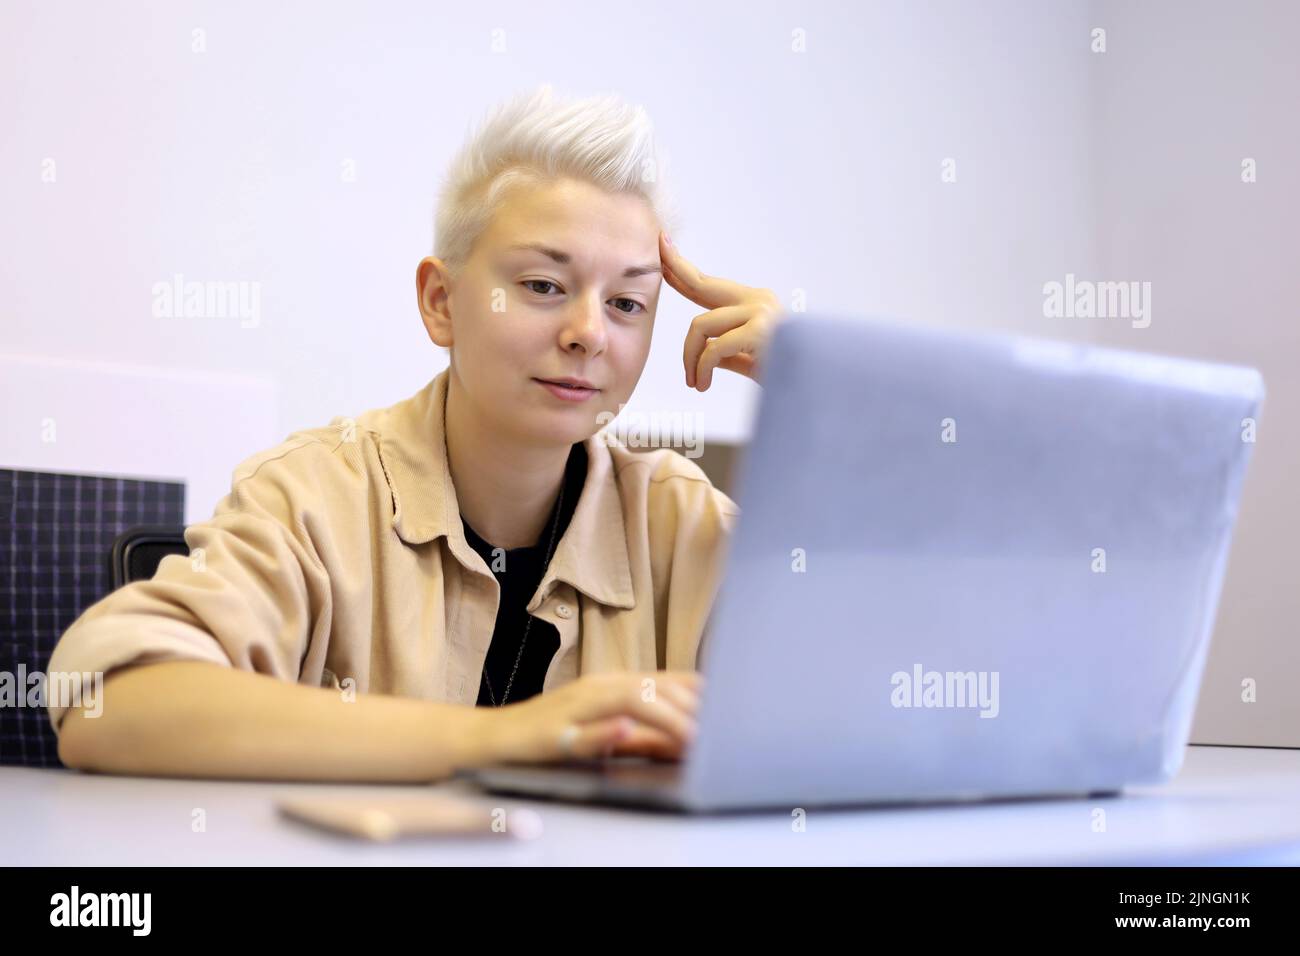 Smiling girl with short blonde hair sitting at office table with laptop. Tomboy lifestyle, concept of inspiration at work and creativity Stock Photo